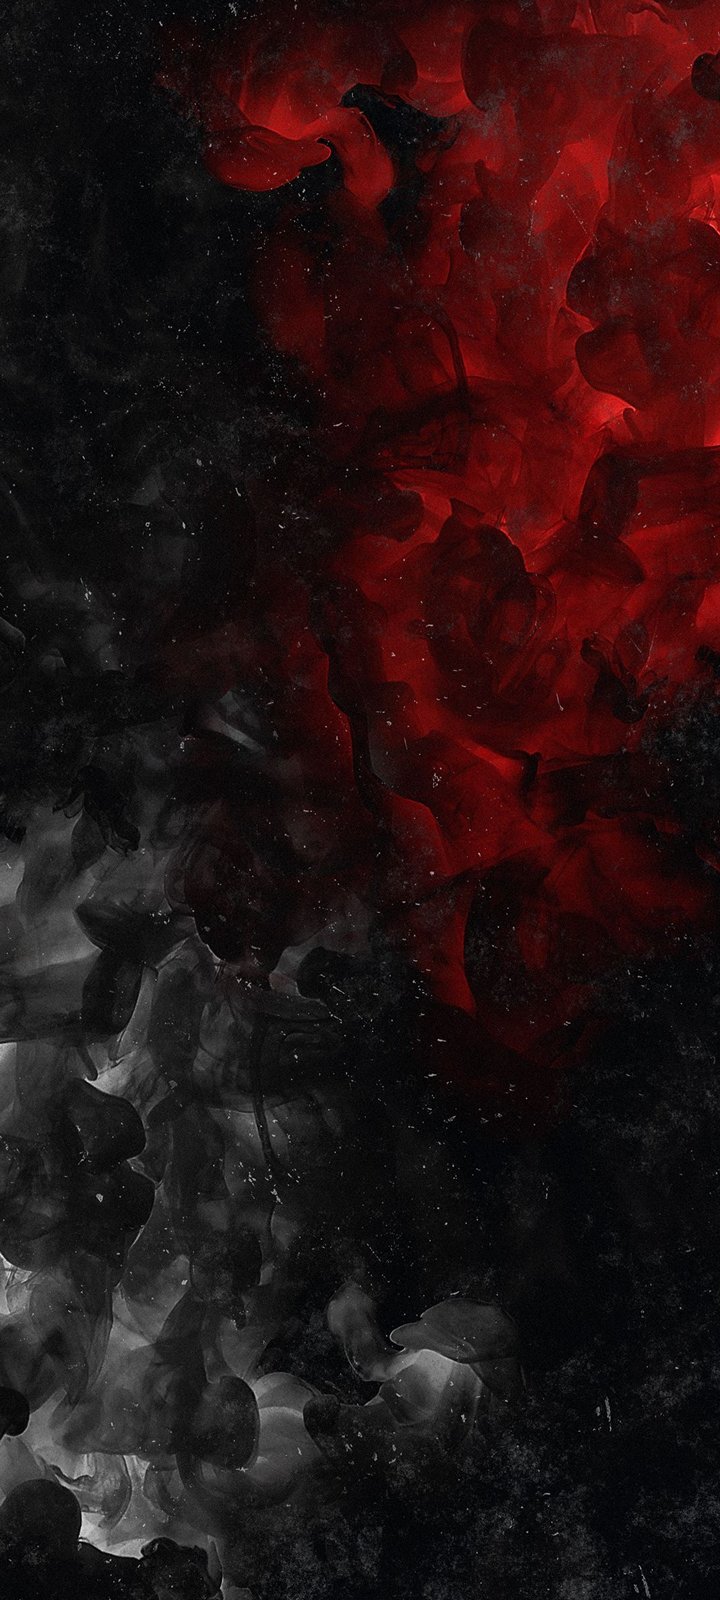 Abstract Red Black White Design Background Wallpaper 720x1600